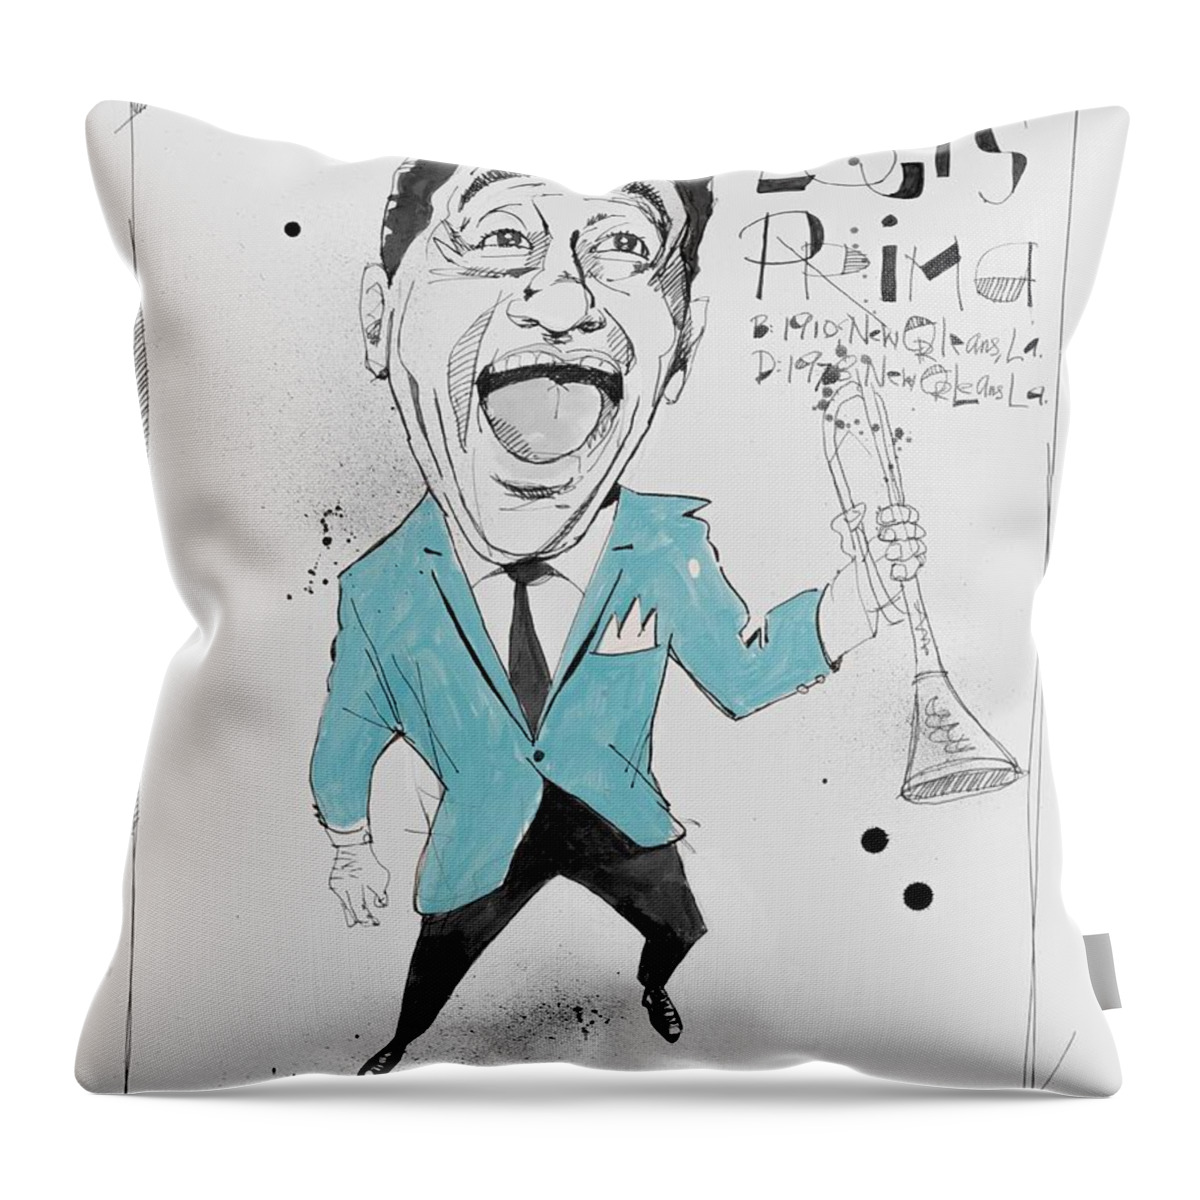  Throw Pillow featuring the drawing Louis Prima by Phil Mckenney